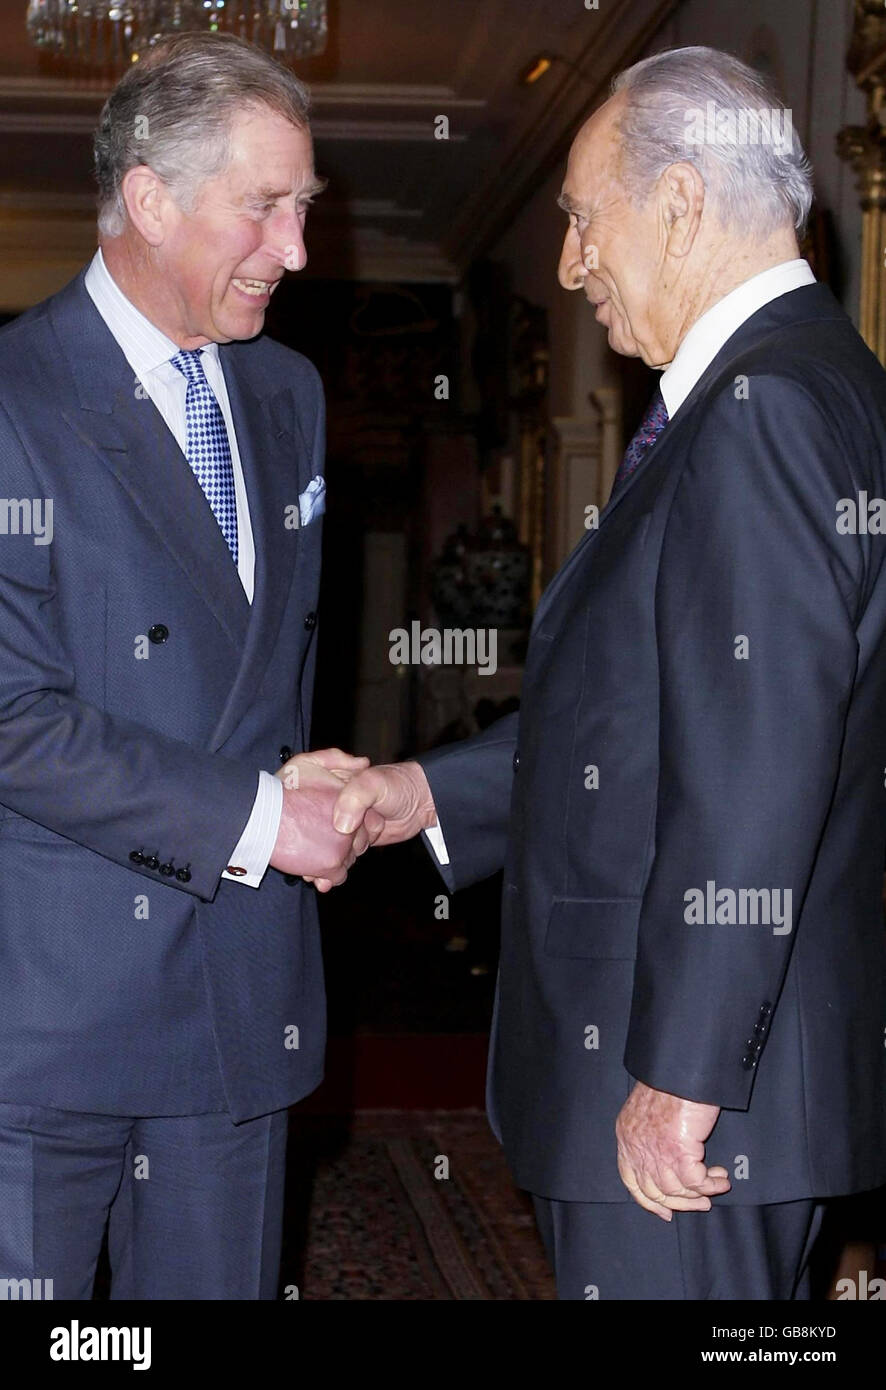 The Prince of Wales (left) meets President of Israel Shimon Peres at Clarence House, London. Stock Photo